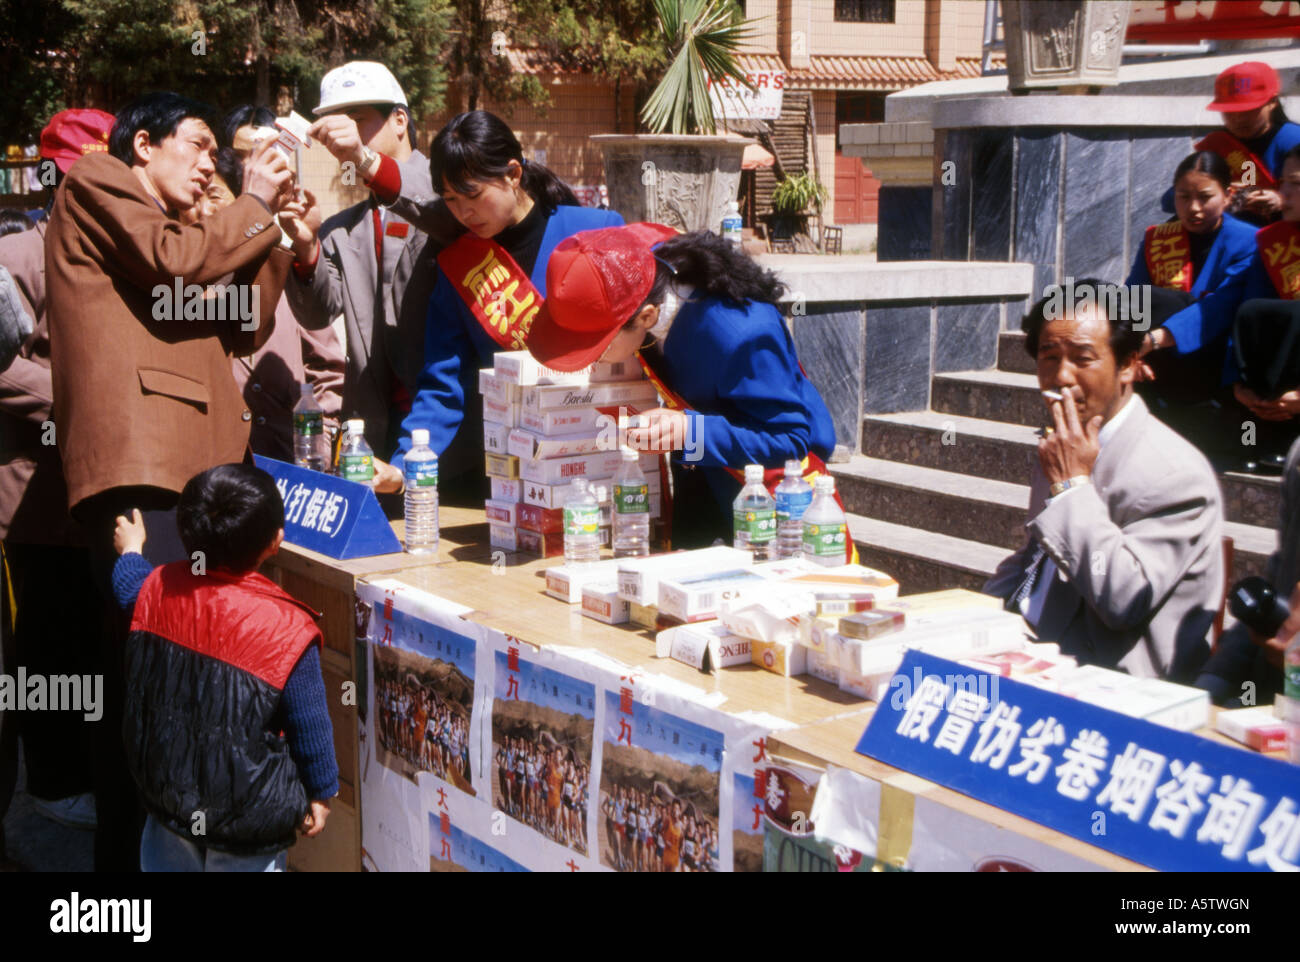 Local people view an official display of confiscated counterfeit goods,Chengdu,Sichuan Province,China. Stock Photo